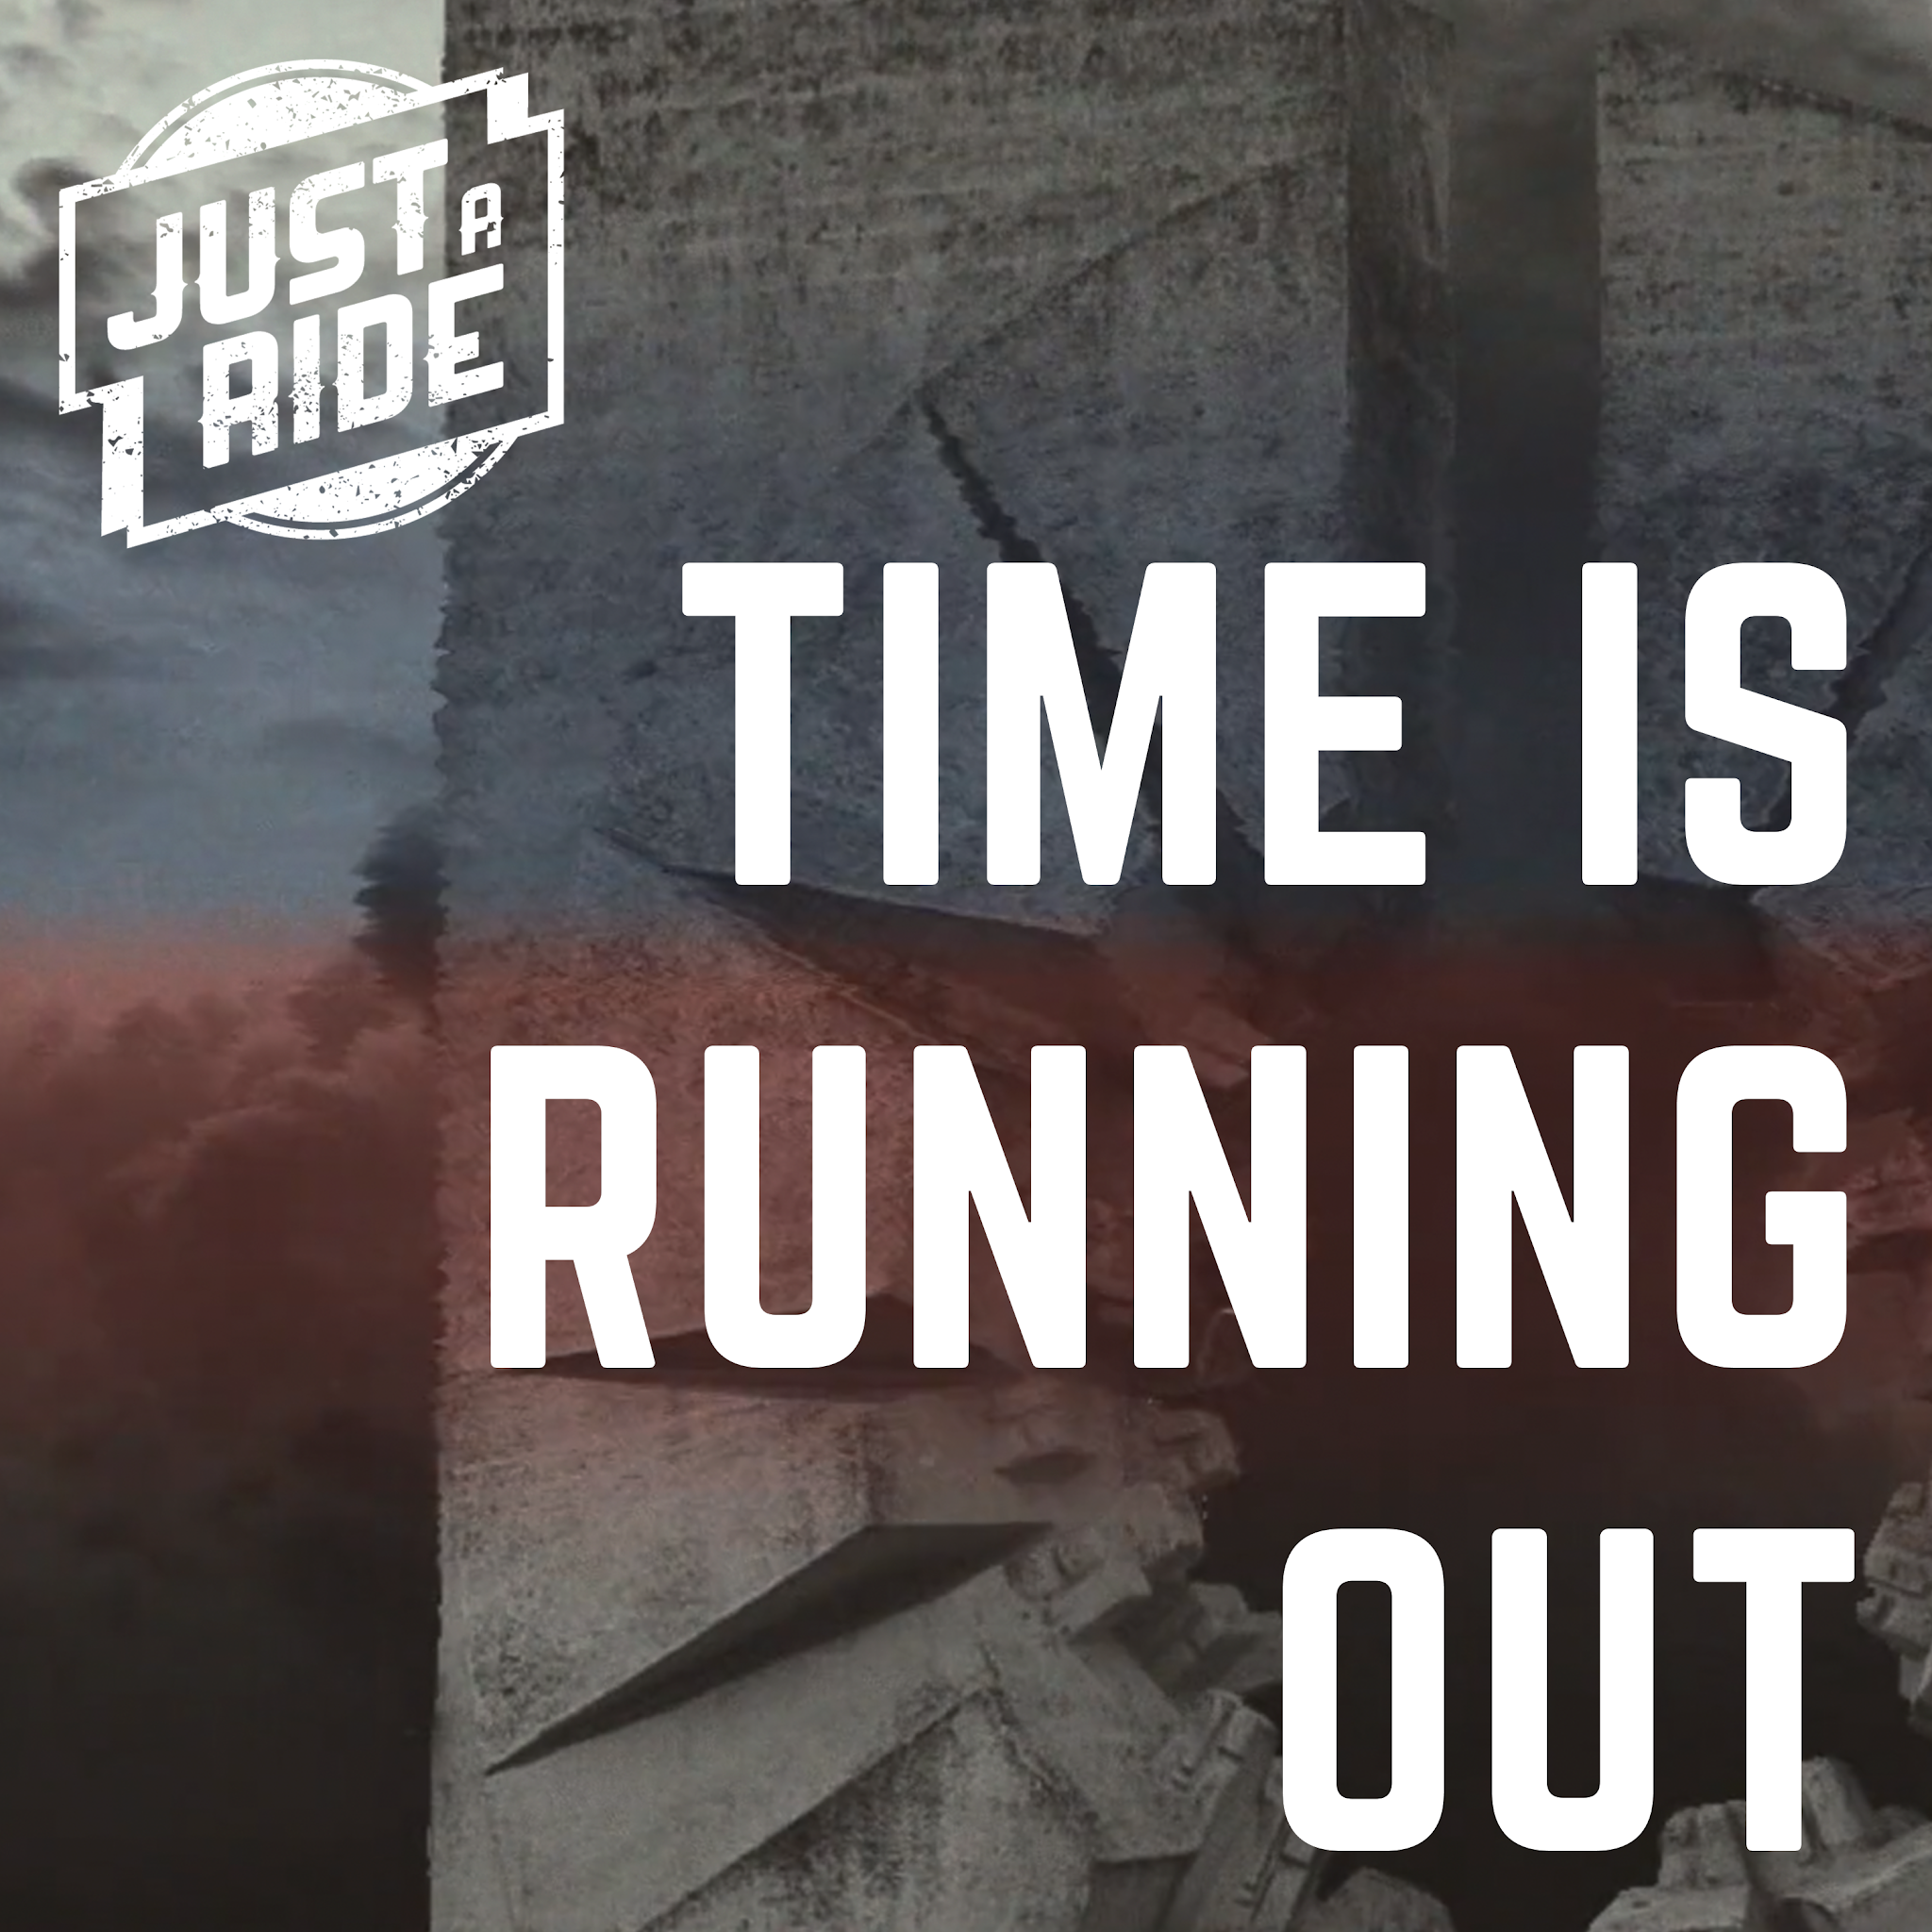 'Time is running out' by 'Just A Ride'